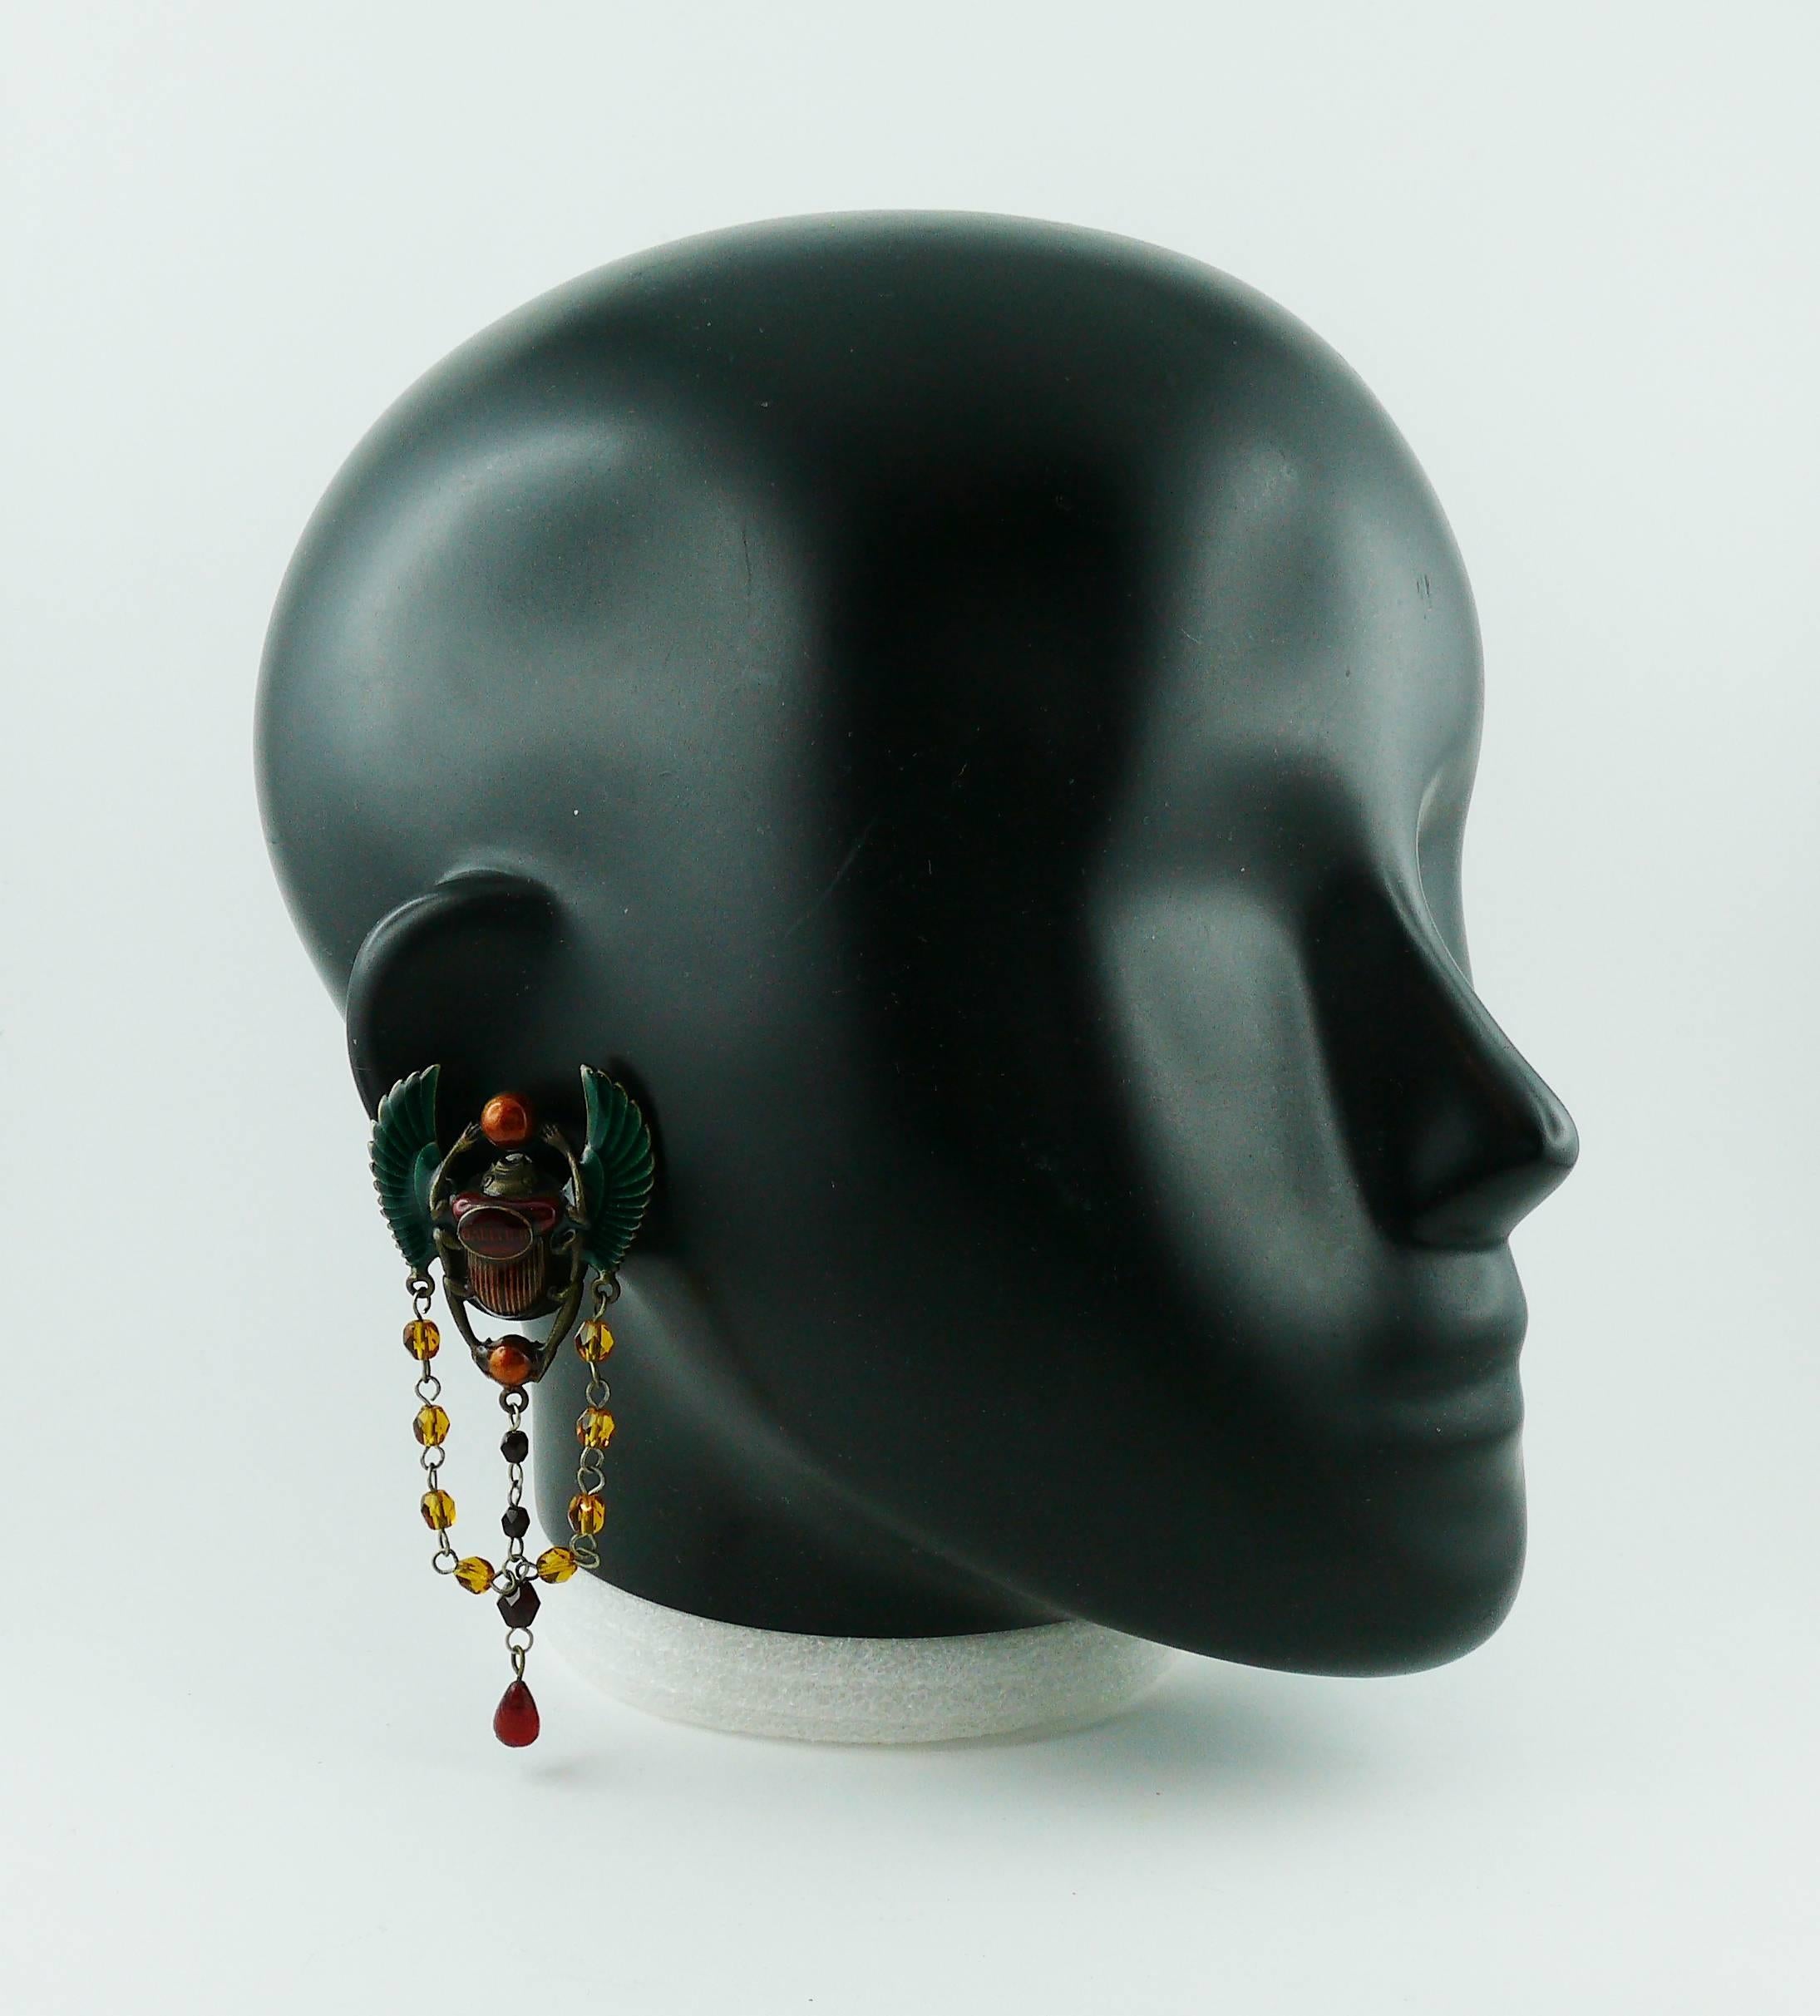 JEAN PAUL GAULTIER 1990s gorgeous clip-on earrings featuring enameled scarab beetle in a gun patina metal setting with glass bead chains.

GAULTIER logo at center.

Indicative measurements : max. height approx. 8.6 cm (3.39 inches) / max. width